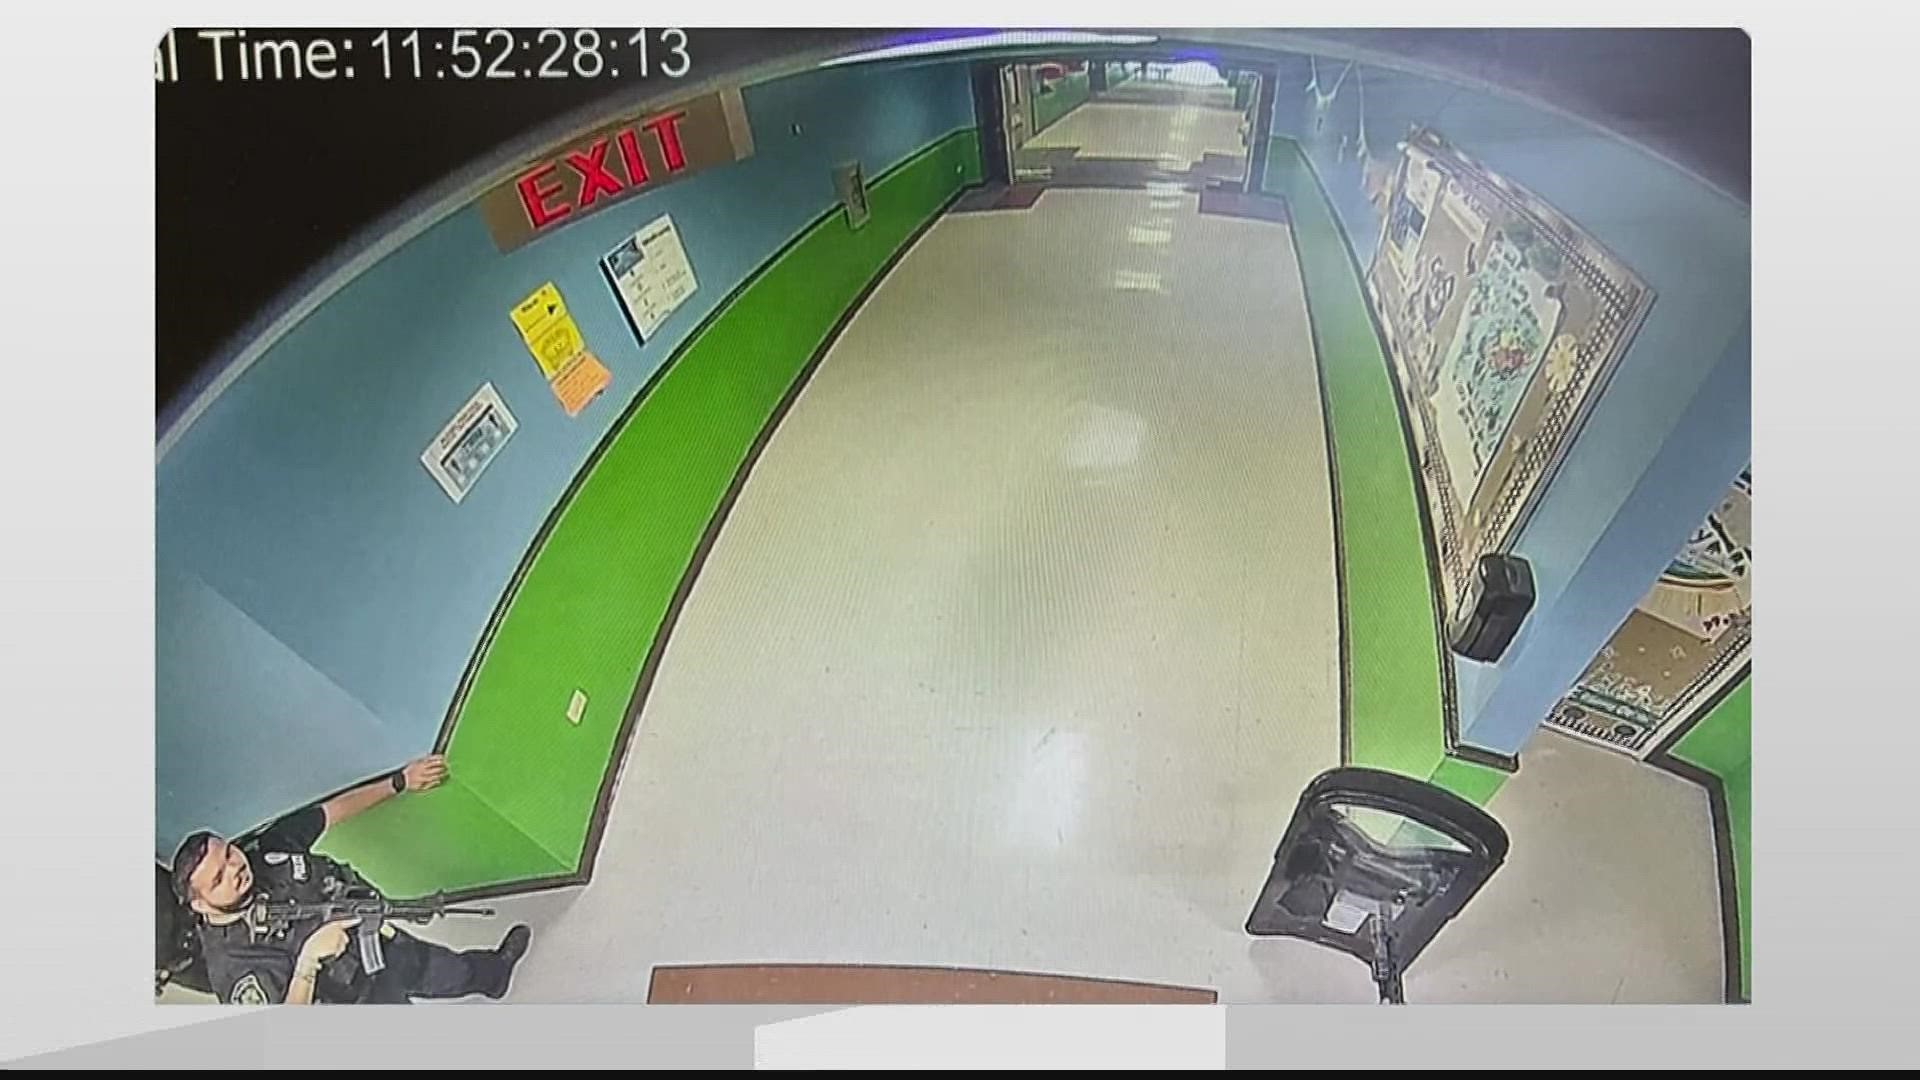 Until Tuesday, the public has not seen footage from inside Robb Elementary leading up to the tragic deaths of 21 people.